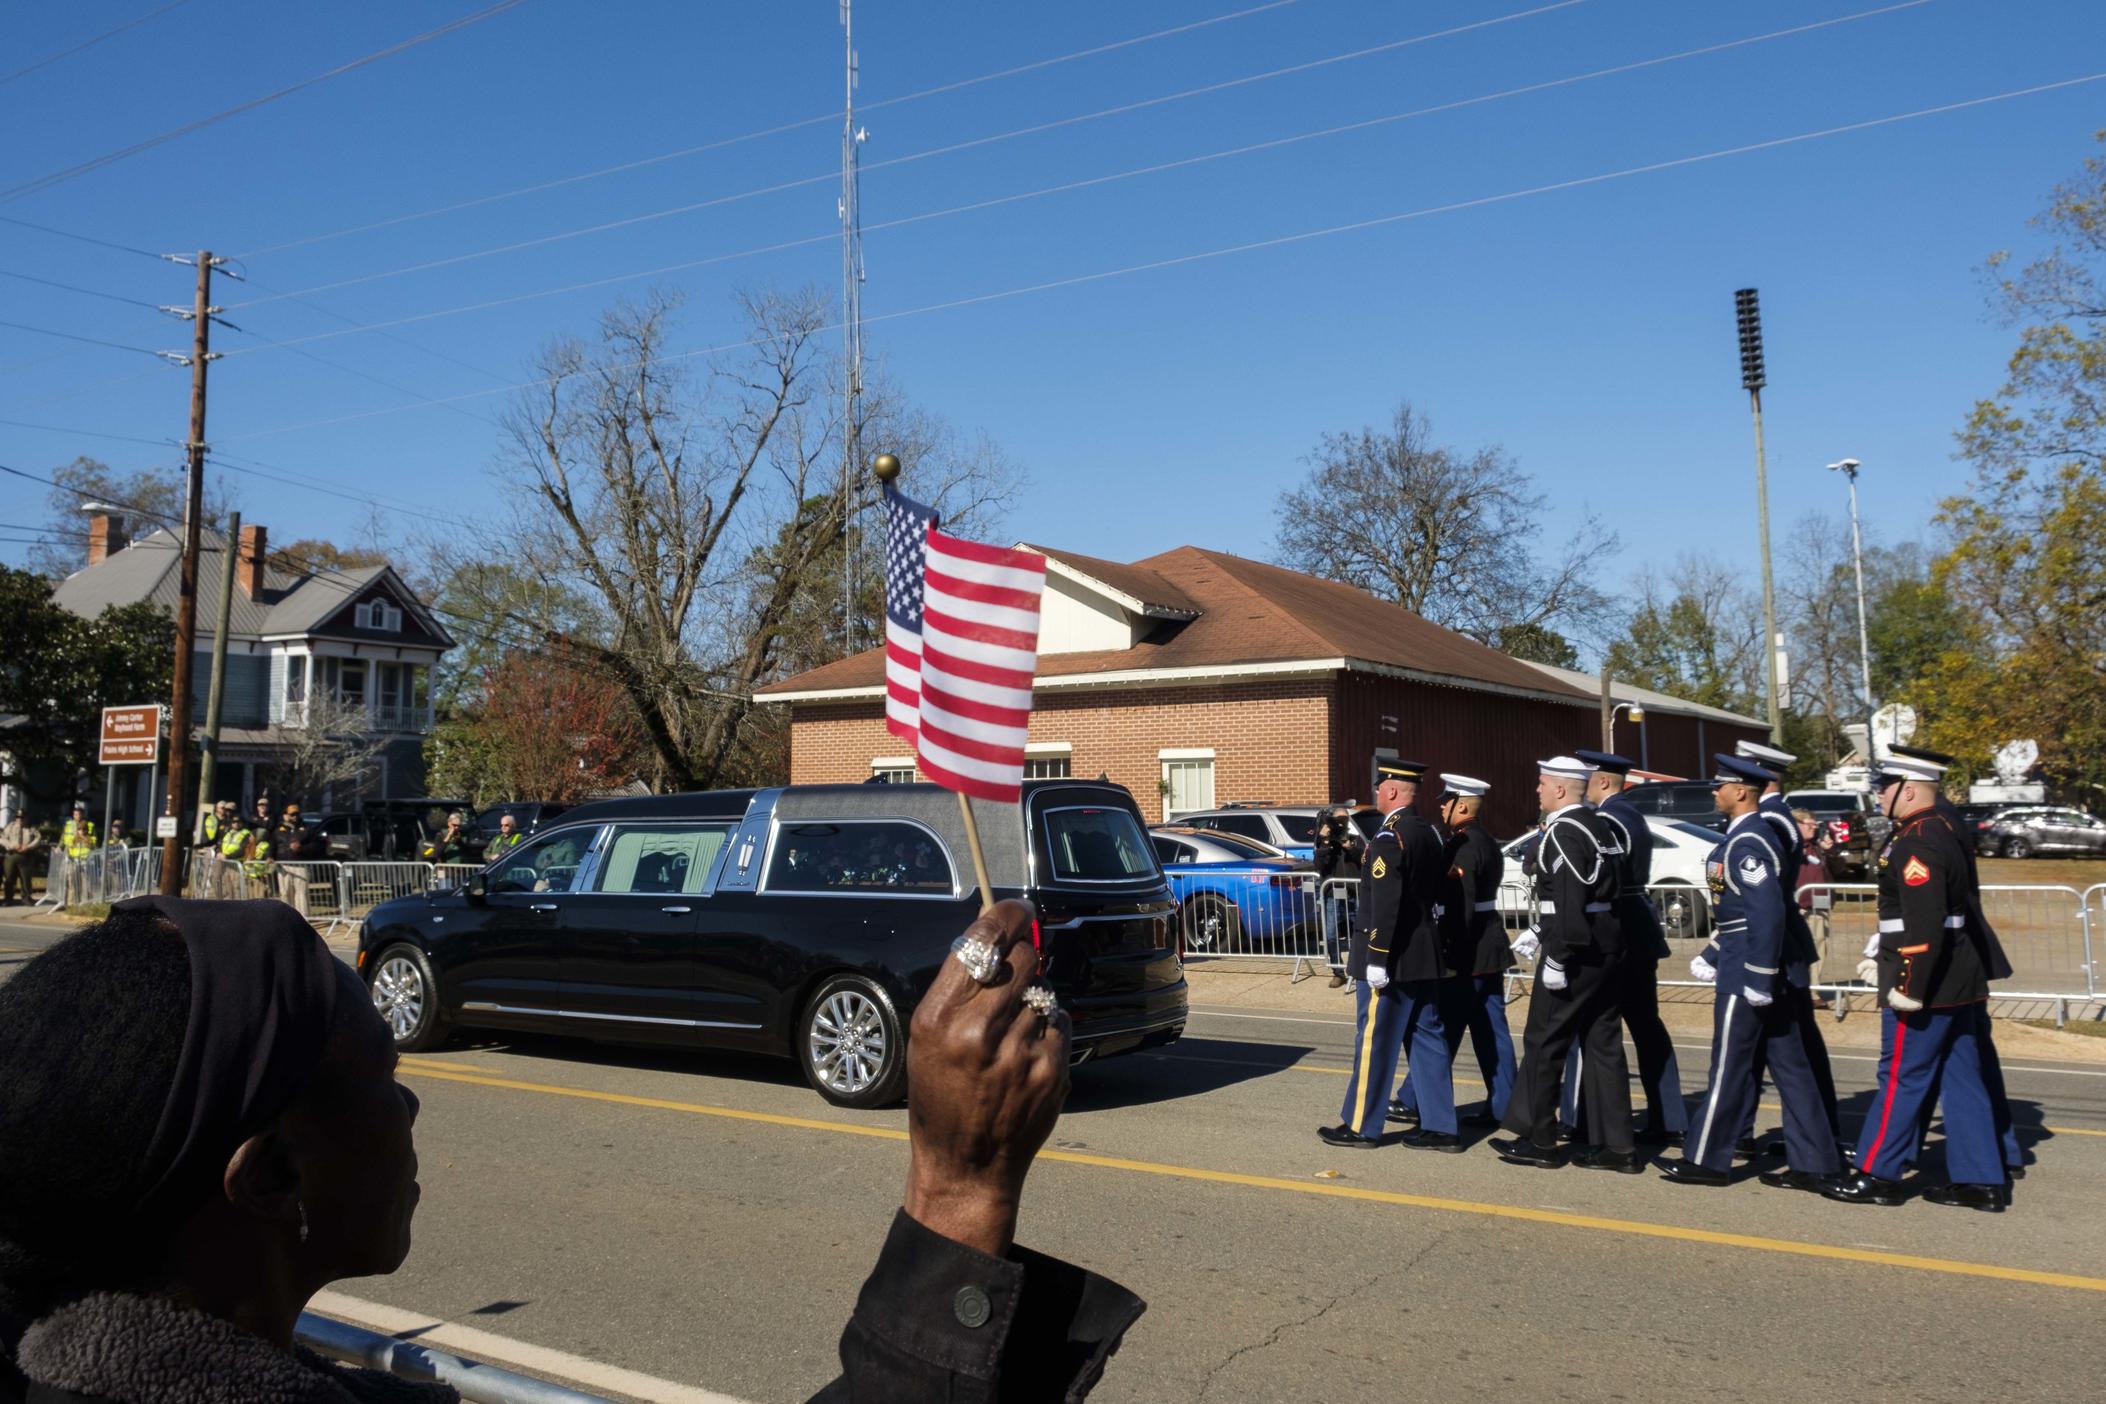 After the funeral for Rosalynn Carter at Maranatha Baptist Church, the hearse carrying her to the Carter family home proceeded through her hometown of Plains where locals lined the street. 